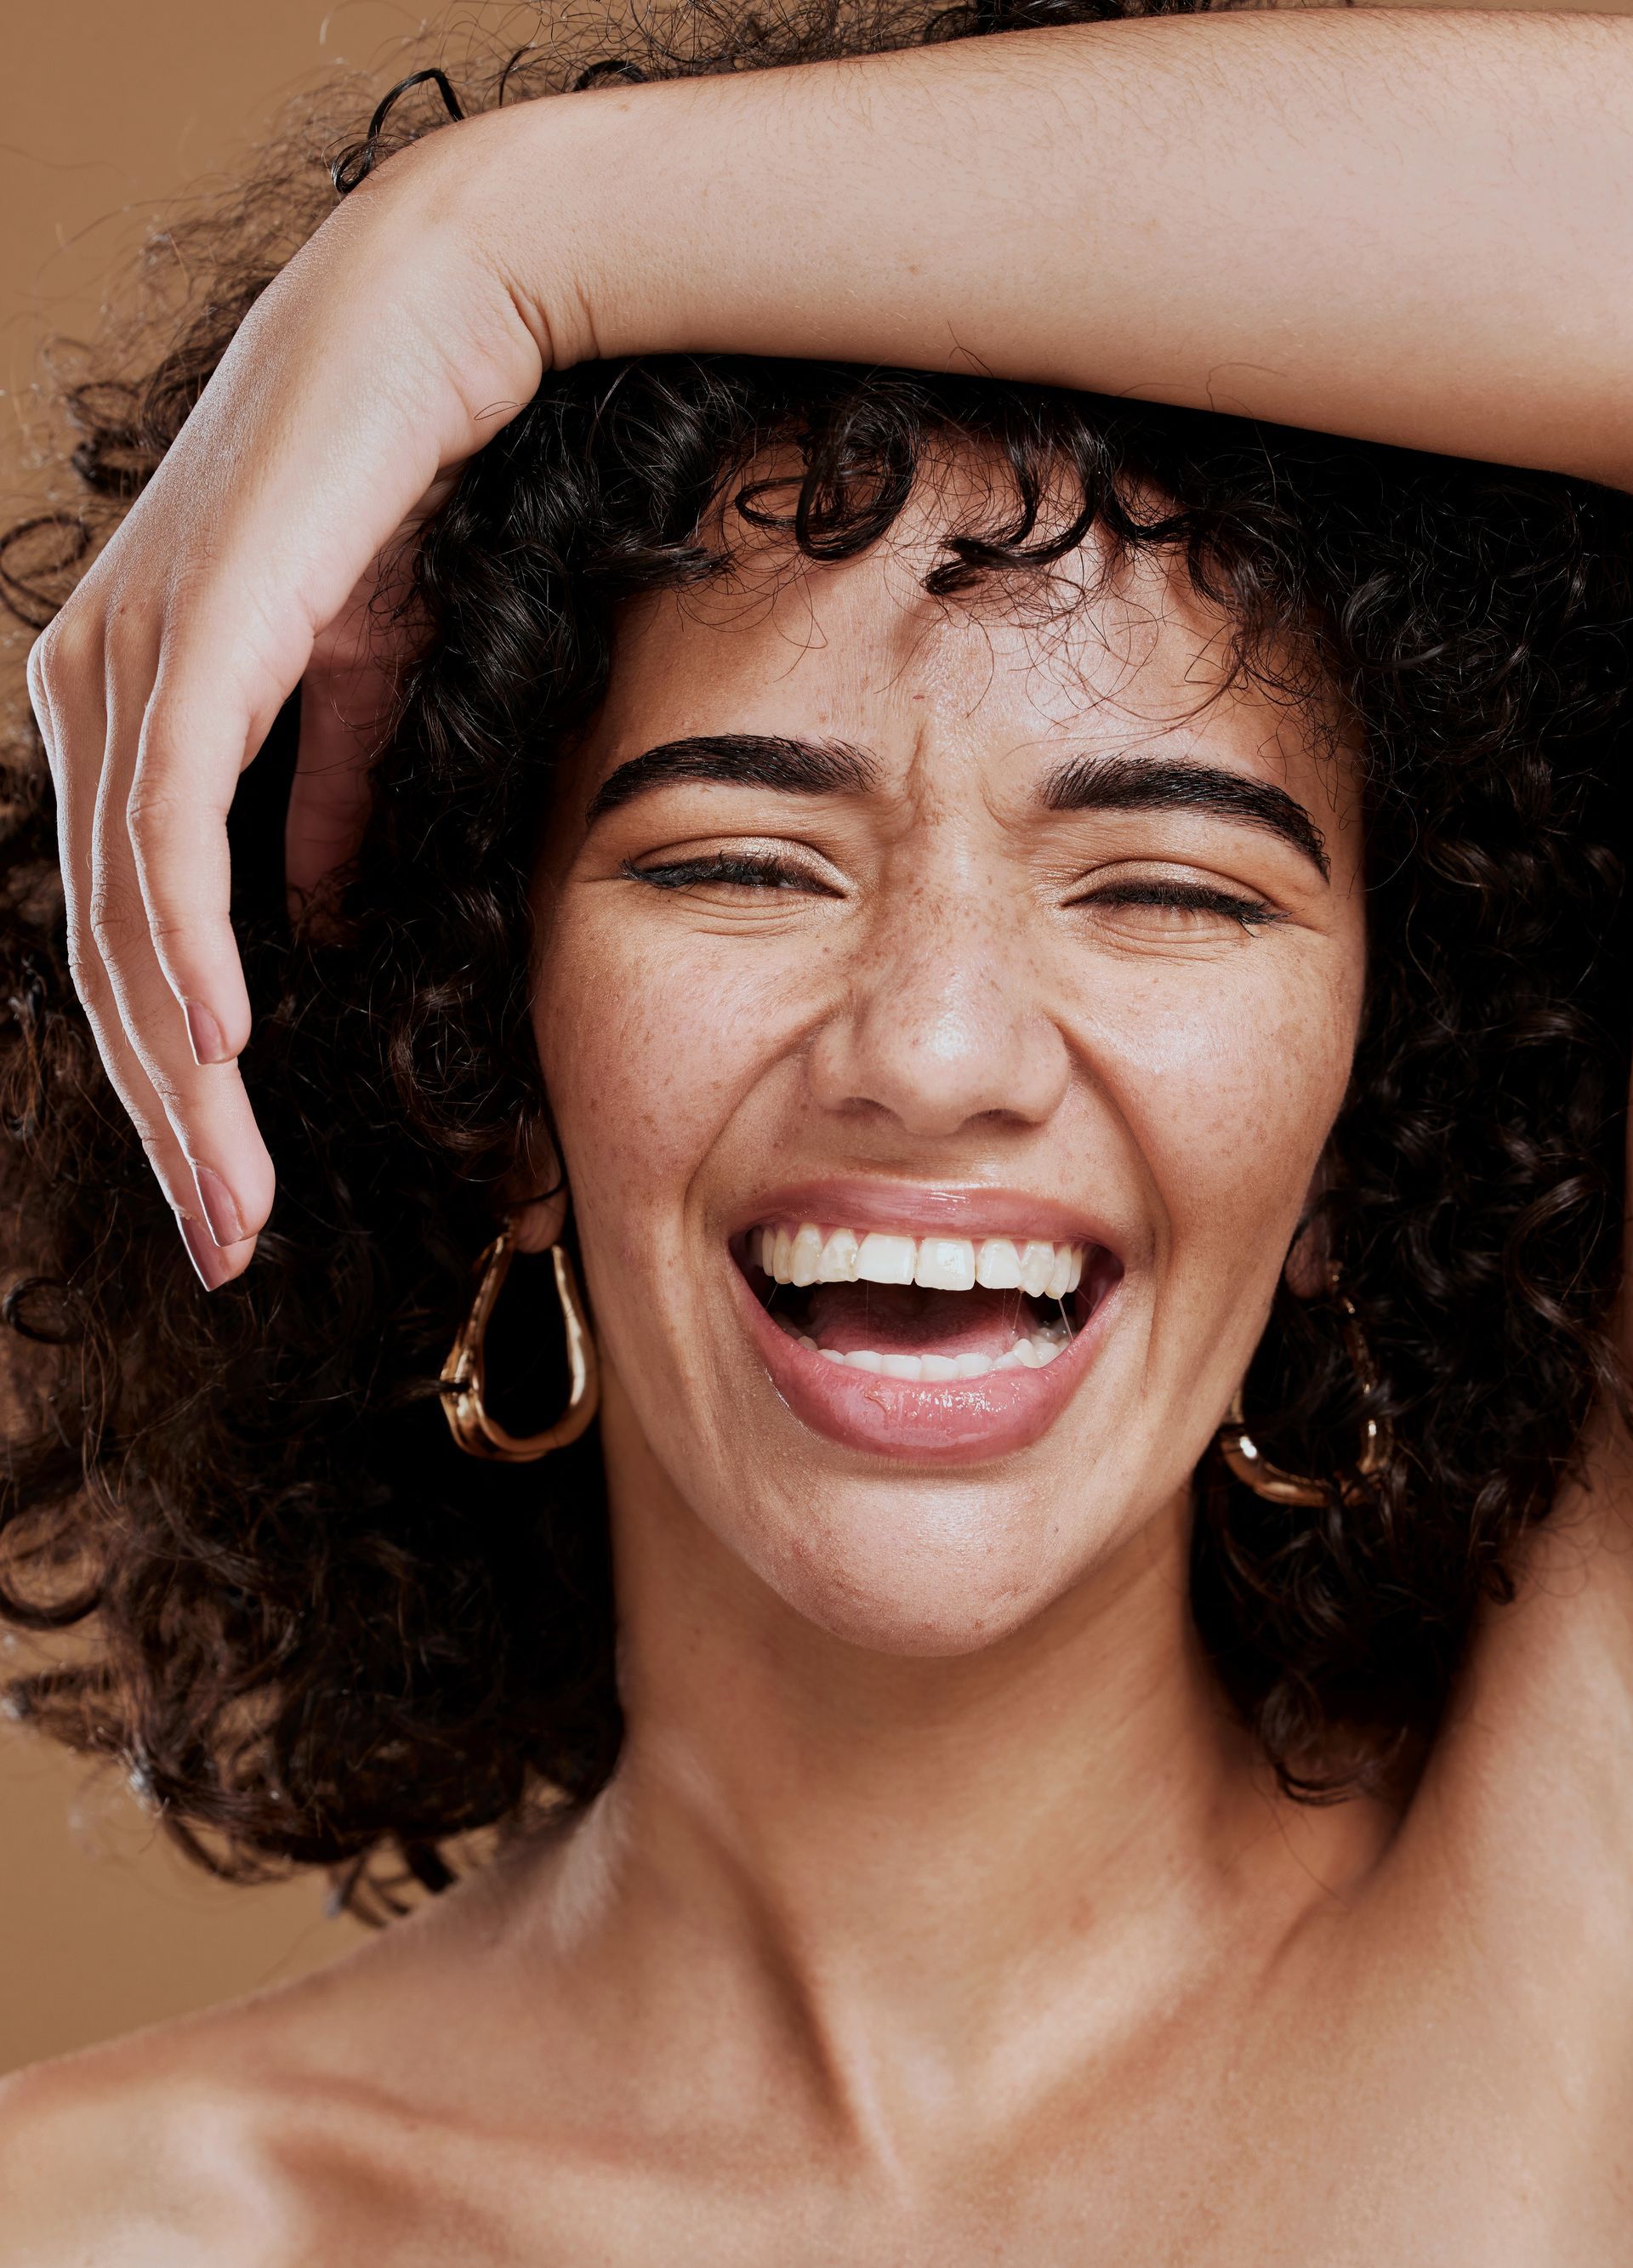 A woman with curly hair and freckles is laughing with her hand on her head.